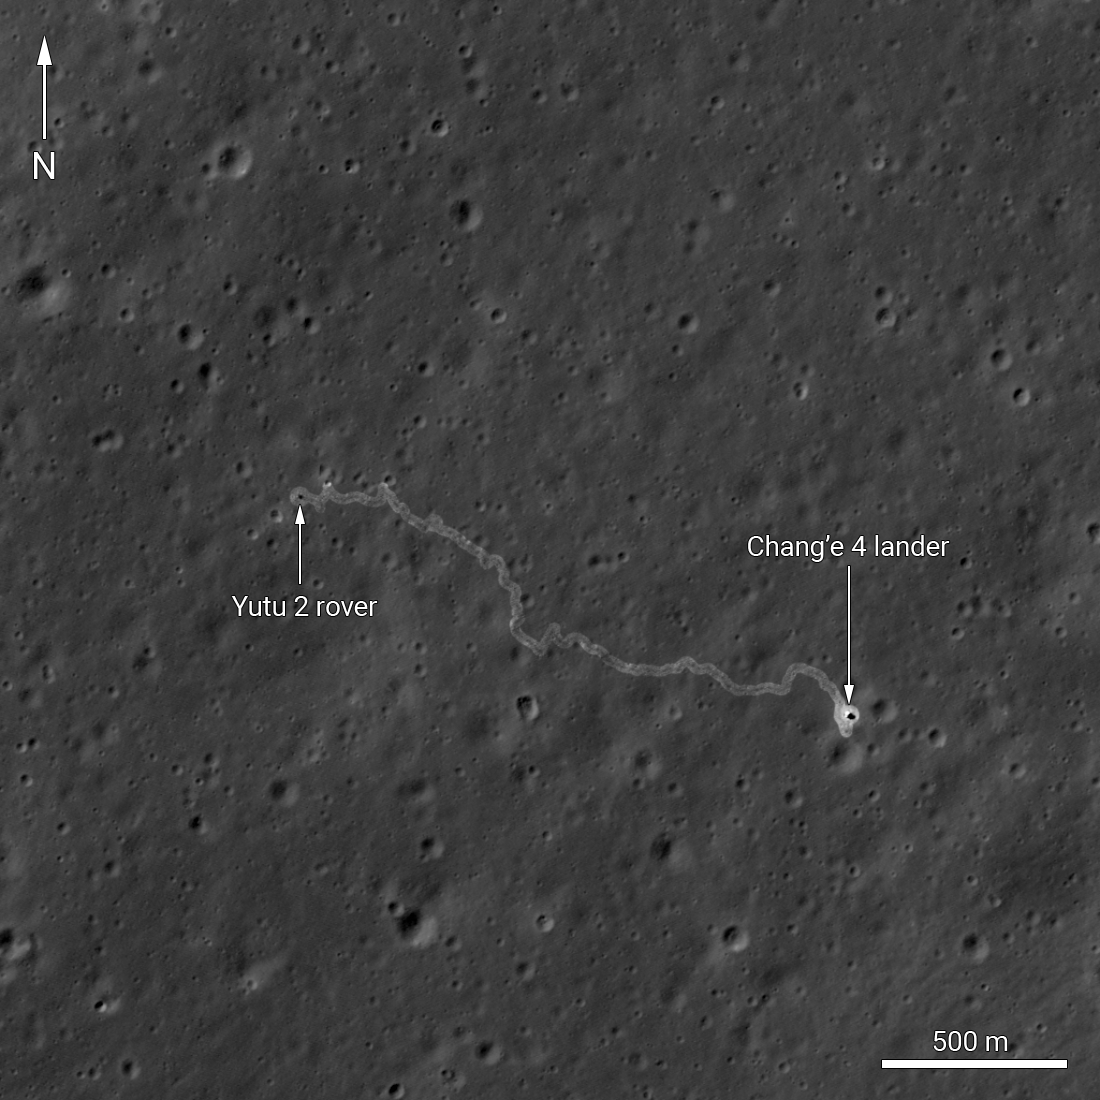 Image from above of the Chang'e 4 landing site with Yutu 2 rover tracks highlighted and labels for the lander and rover.